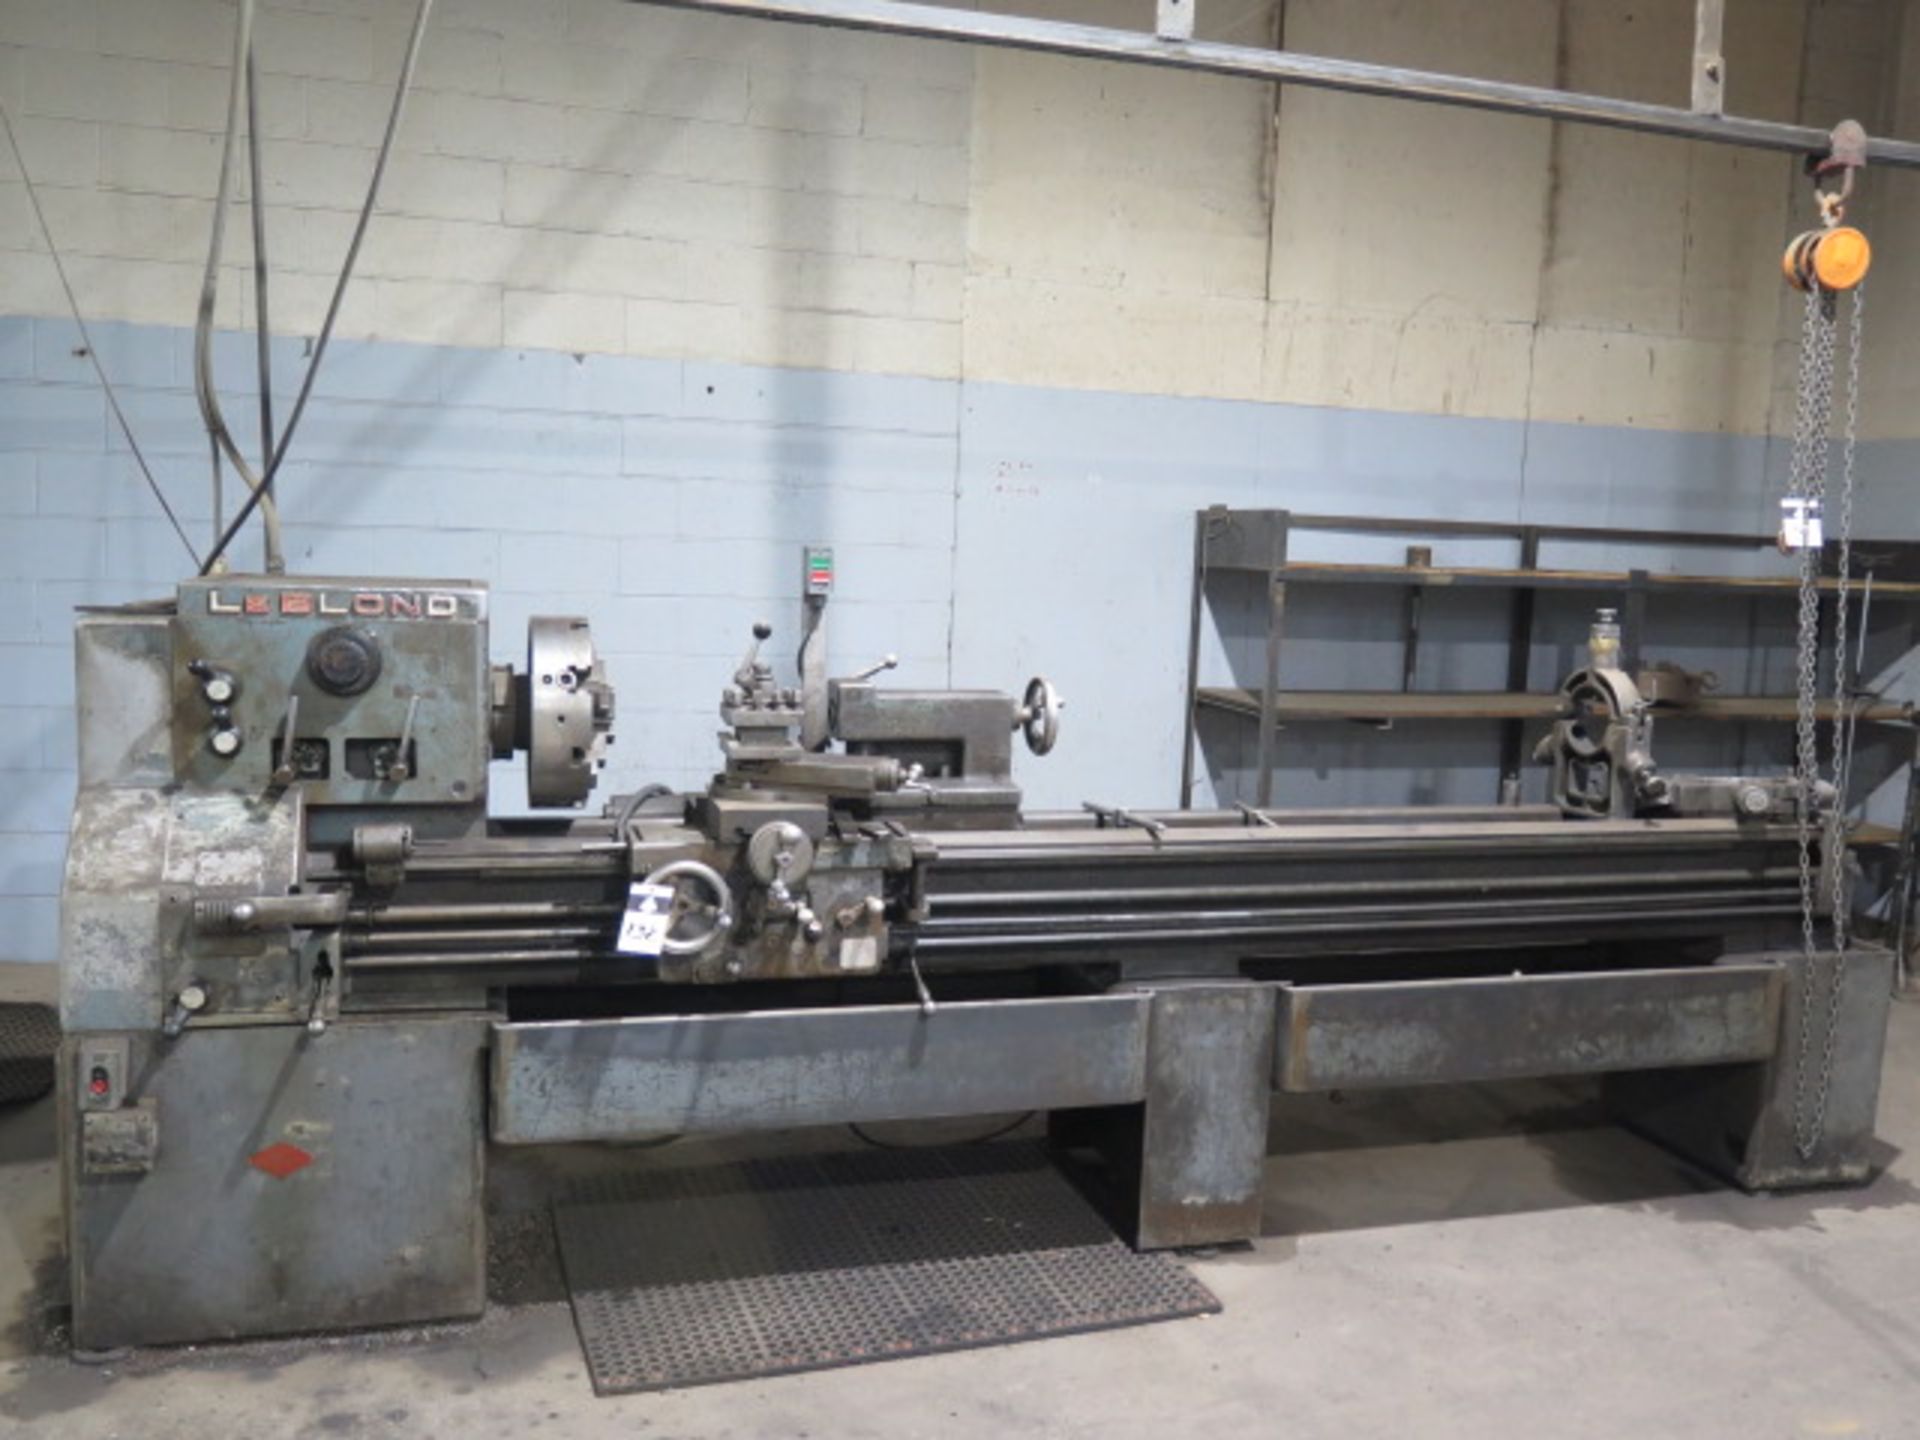 LeBlond 19” x 106” Lathe w/ 25-1000 Dial Change RPM, Inch Threading, Tailstock, (2) Steady Rests,